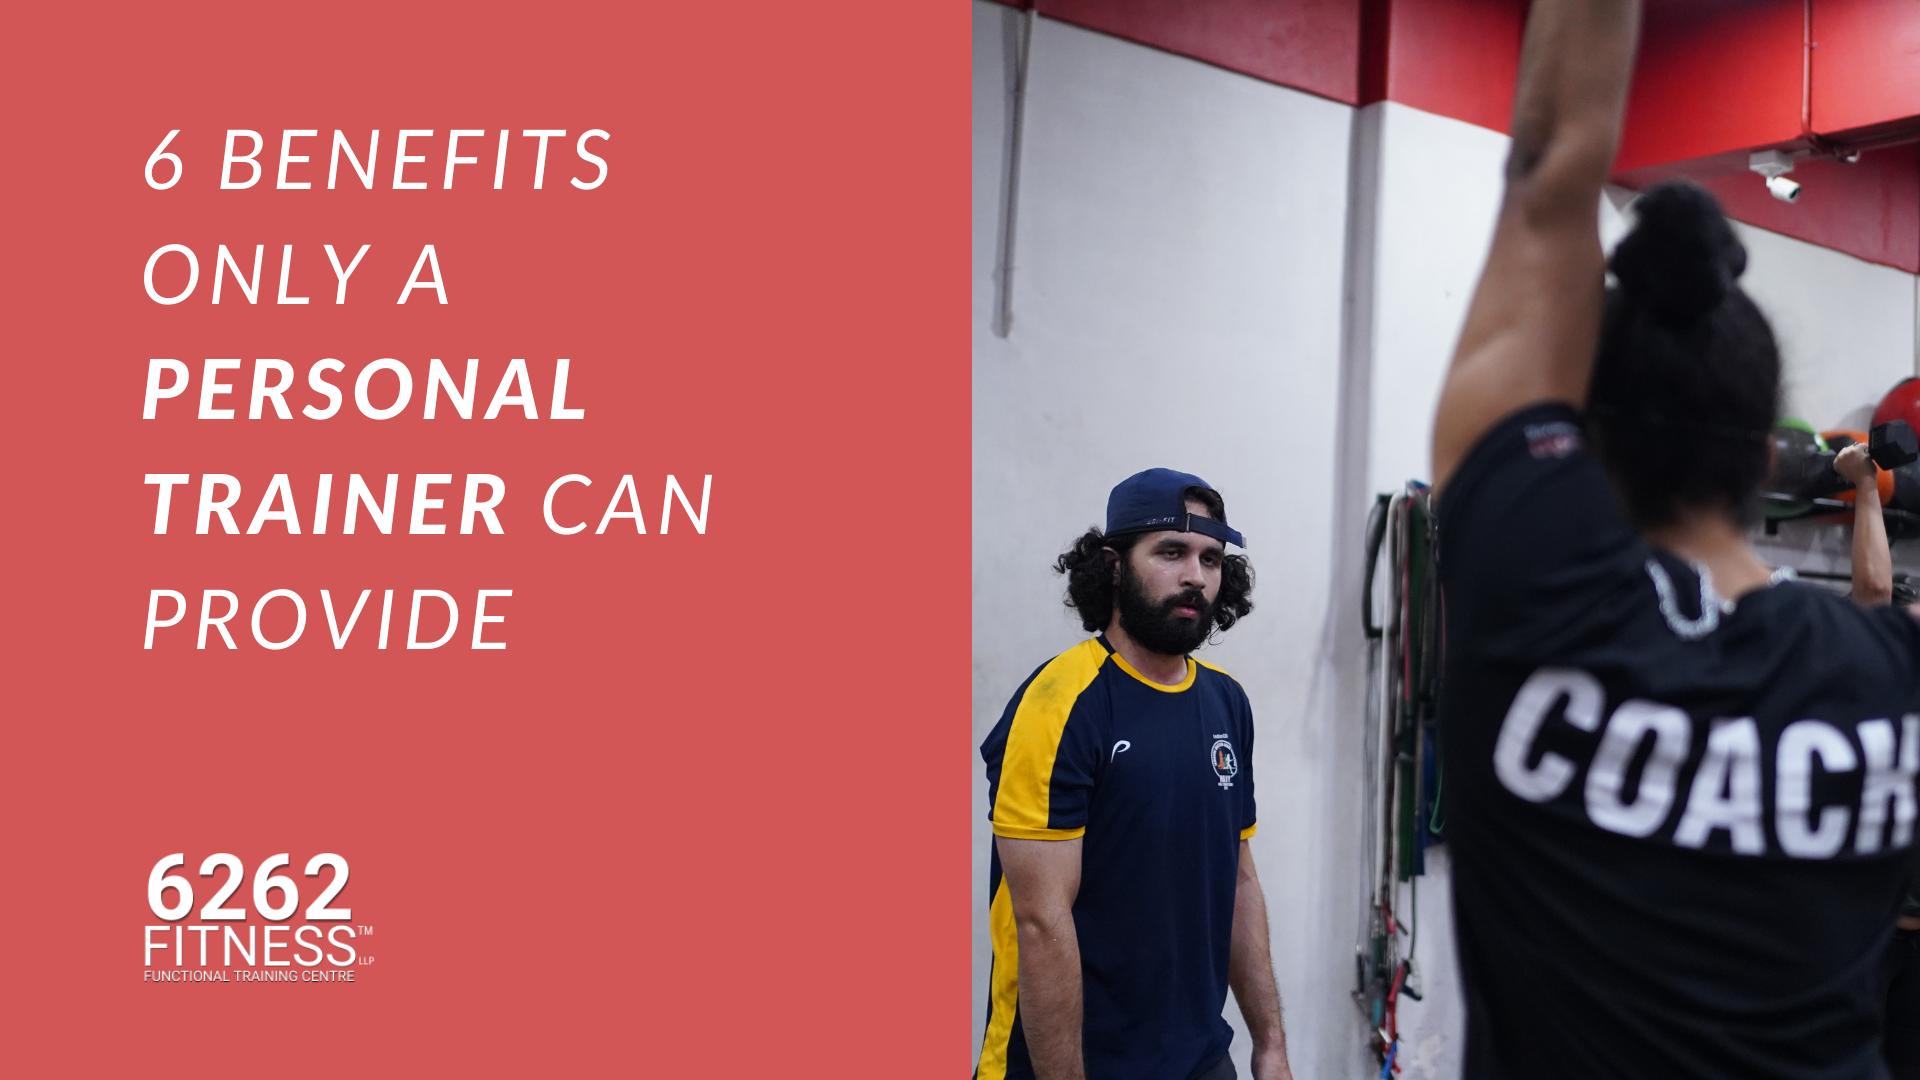 6 Benefits Only a Personal Trainer Can Provide